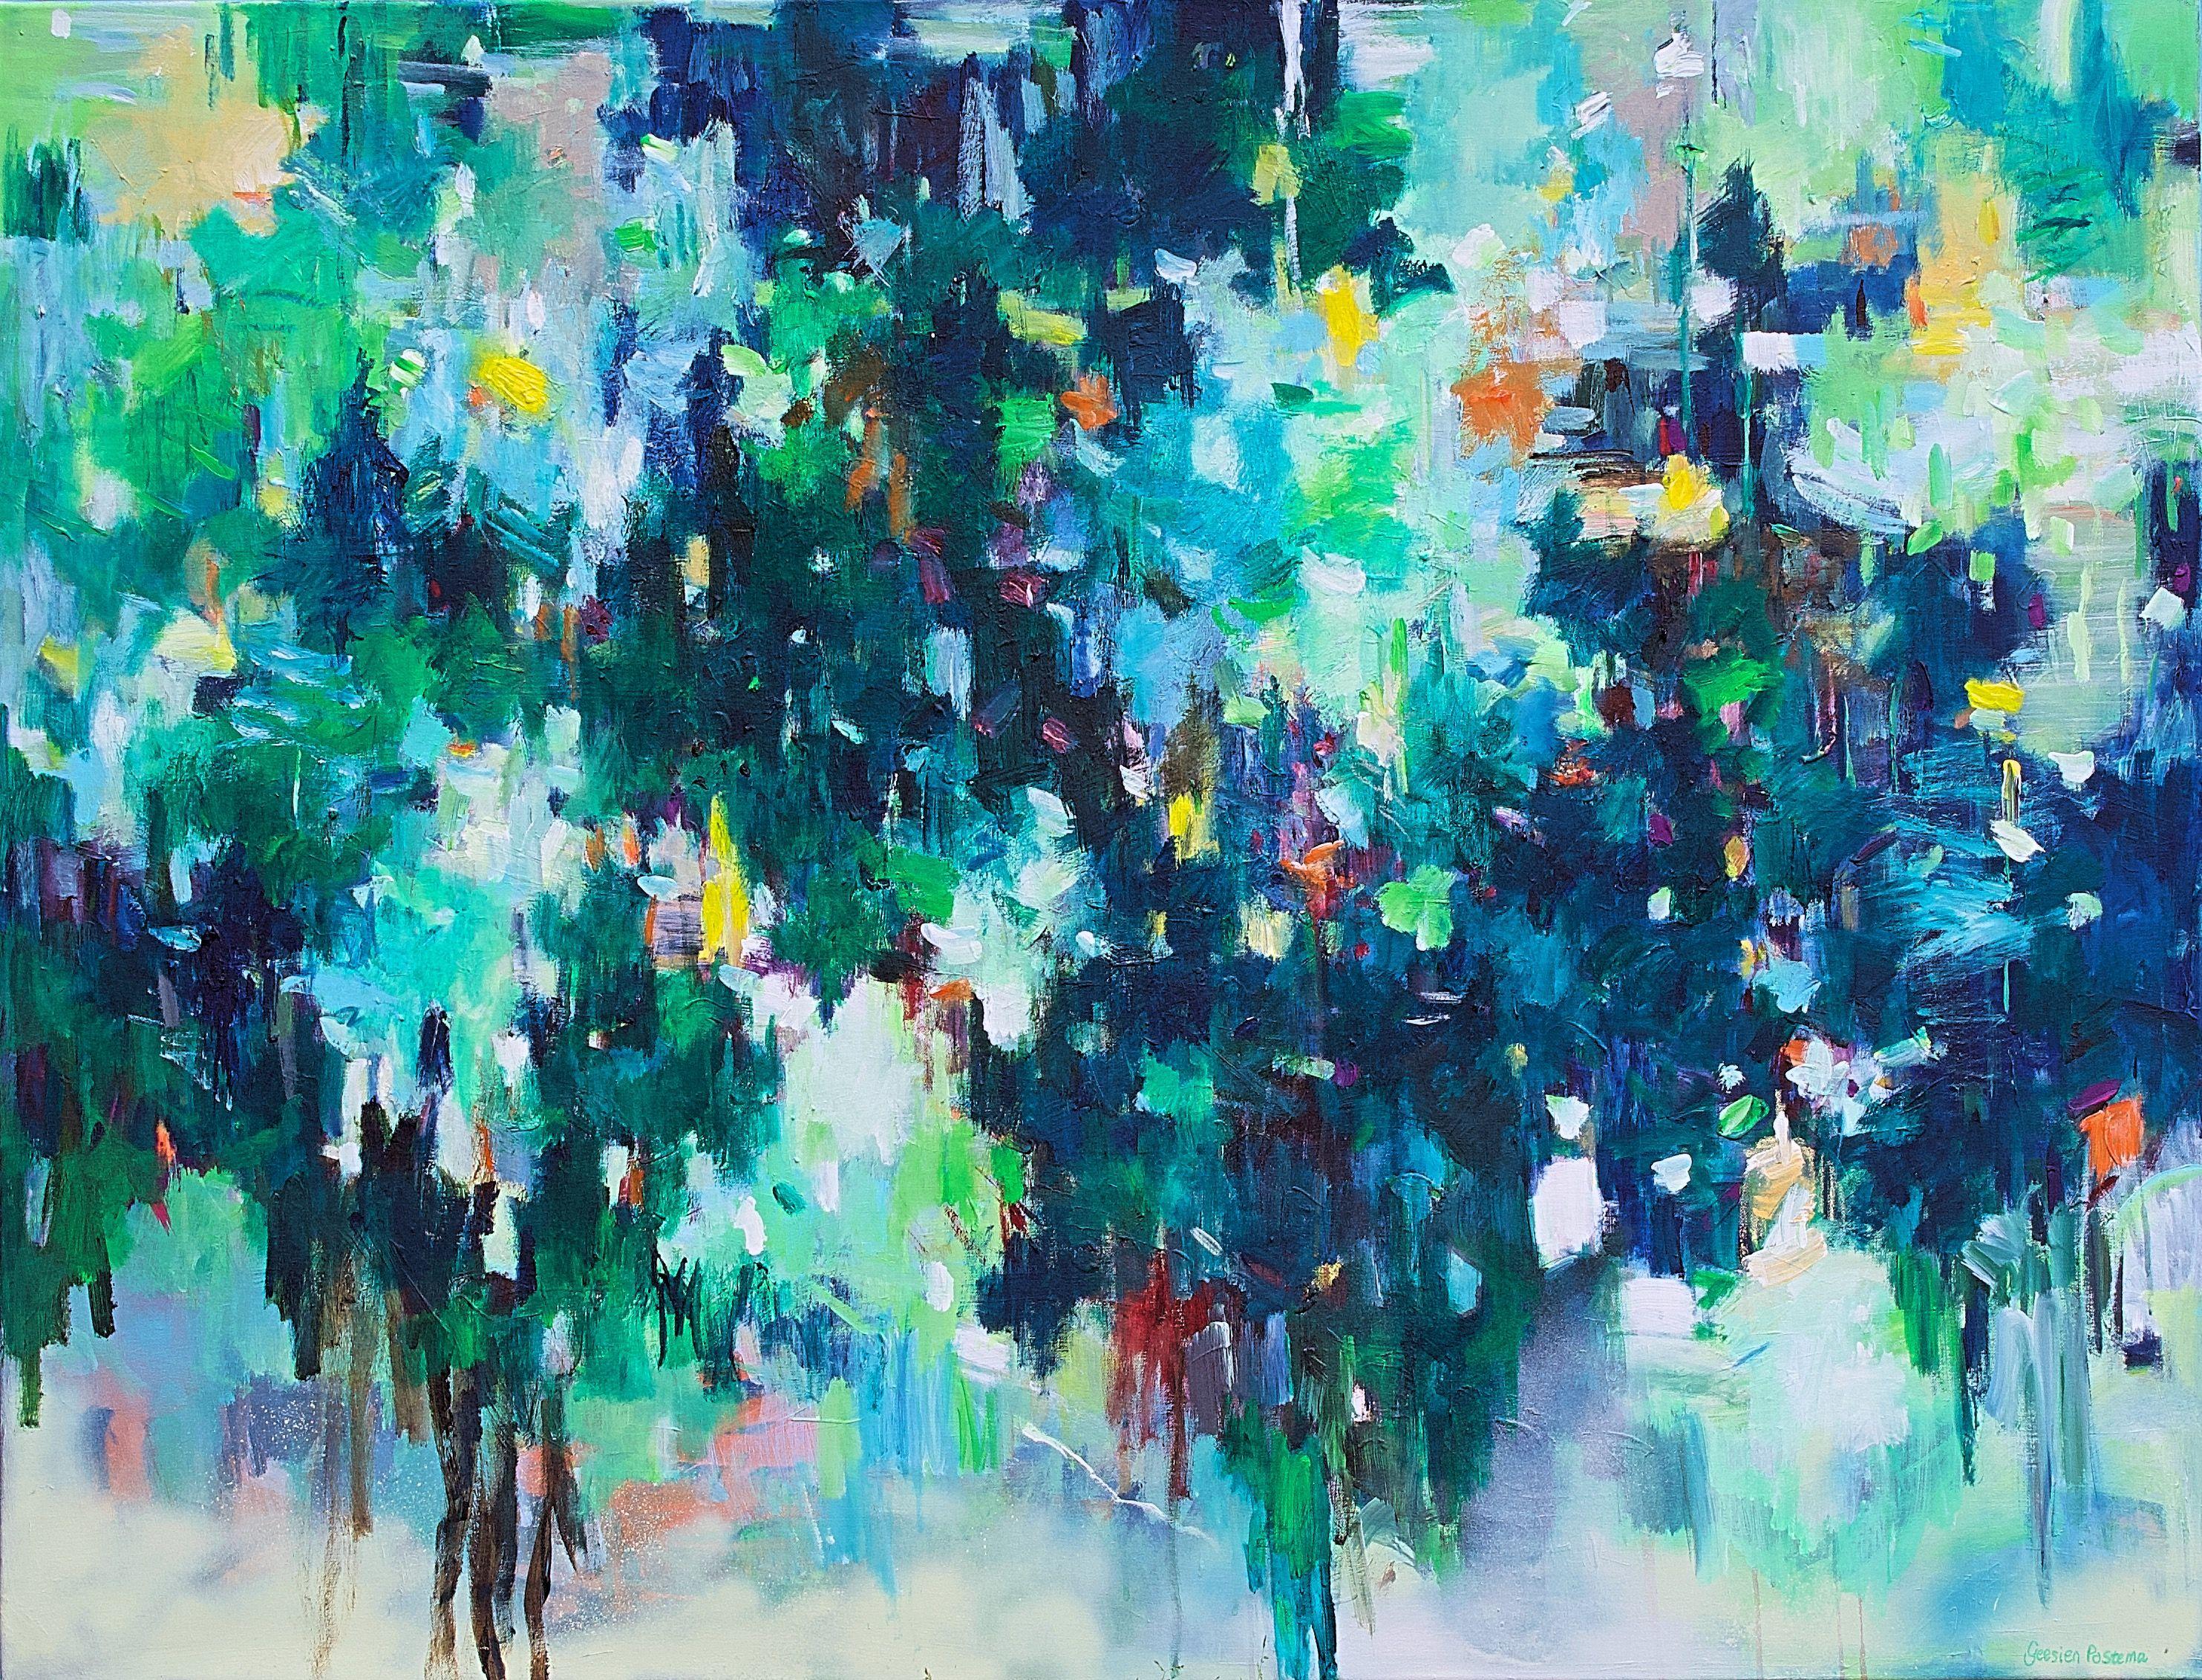 This large expressive painting is a statement piece of art.   It has deep green colors in combination with warm and vibrant details. It is built up in many layers bringing the painting in harmony and balance.  The greens give the painting depth, it